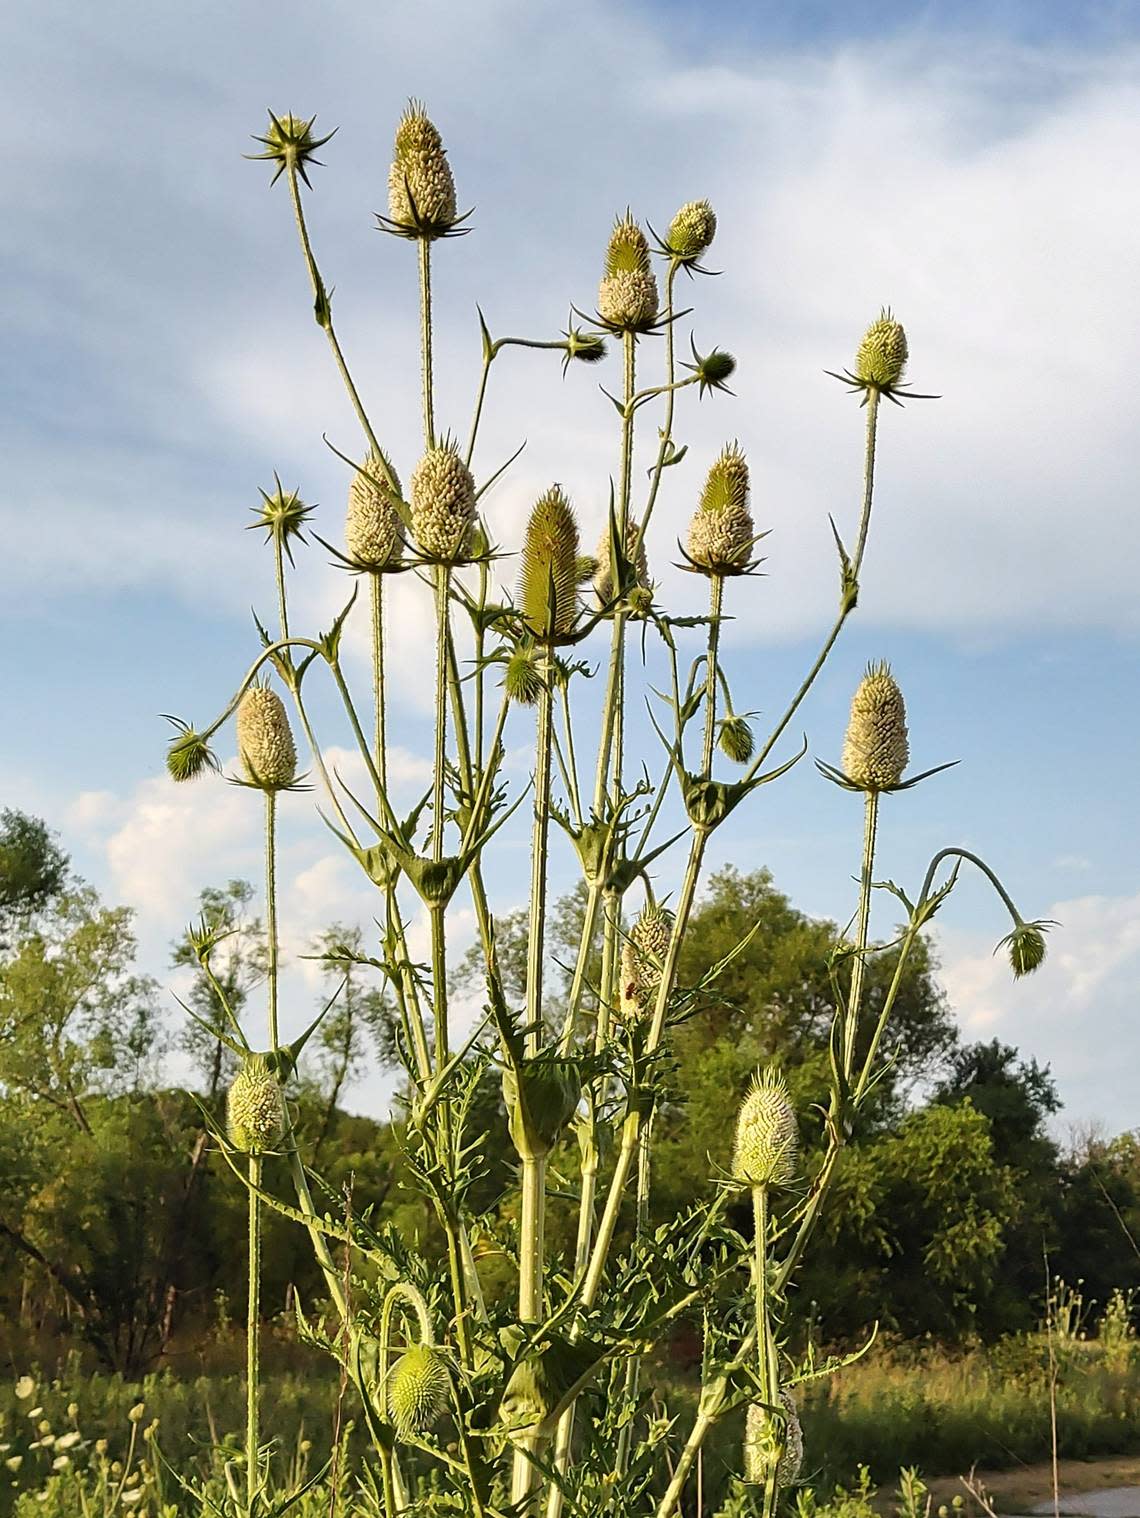 Teasel favors sunny fields, and wastelands such as roadside ditches.